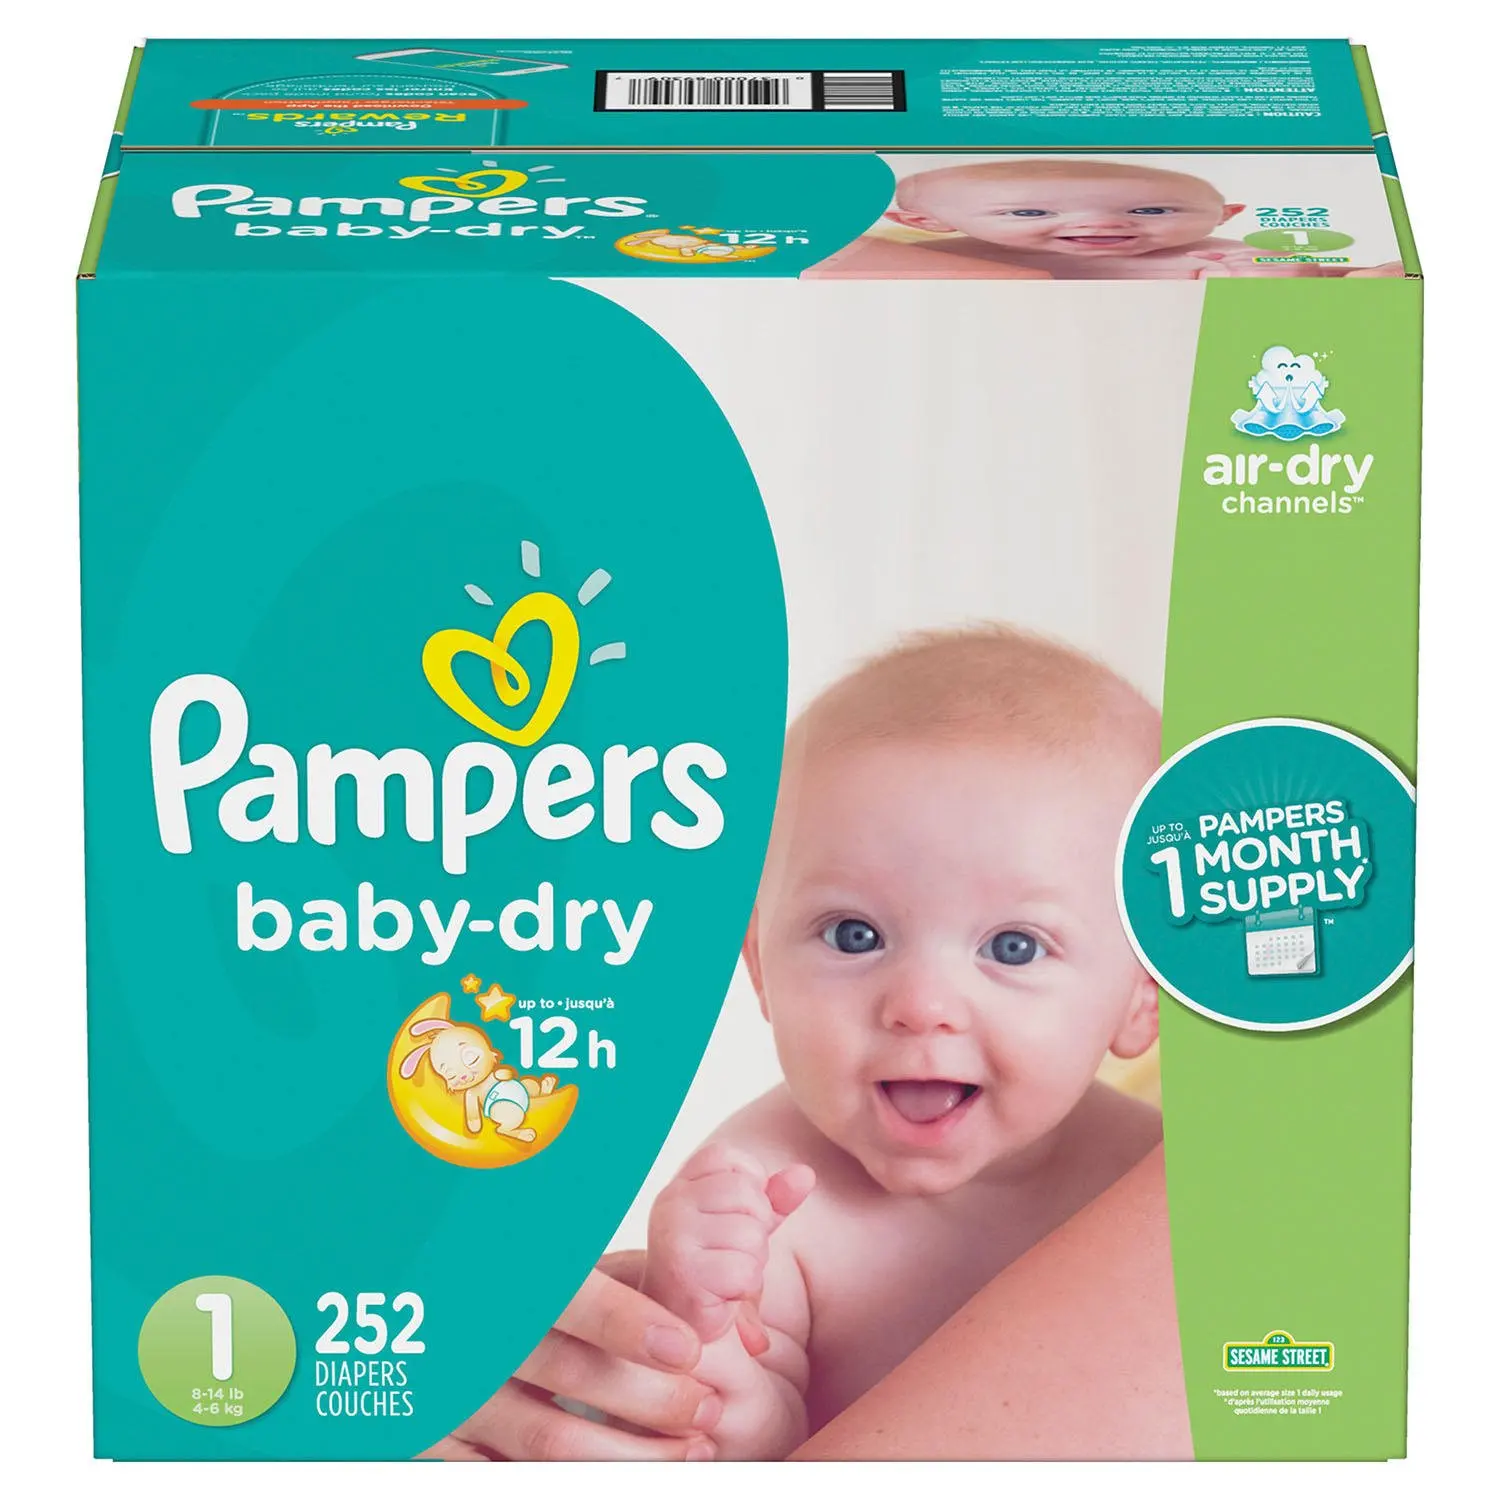 Pijlpunt Blind Afleiden New Pamperings Swaddlers Disposable Baby Diapers - Diapers Size 2,186 Count  / Pampering Soft And Breathable Disposable Baby - Buy Pampering Diapers  Size 2 - 156 Count - Pampers Baby Dry Disposable (